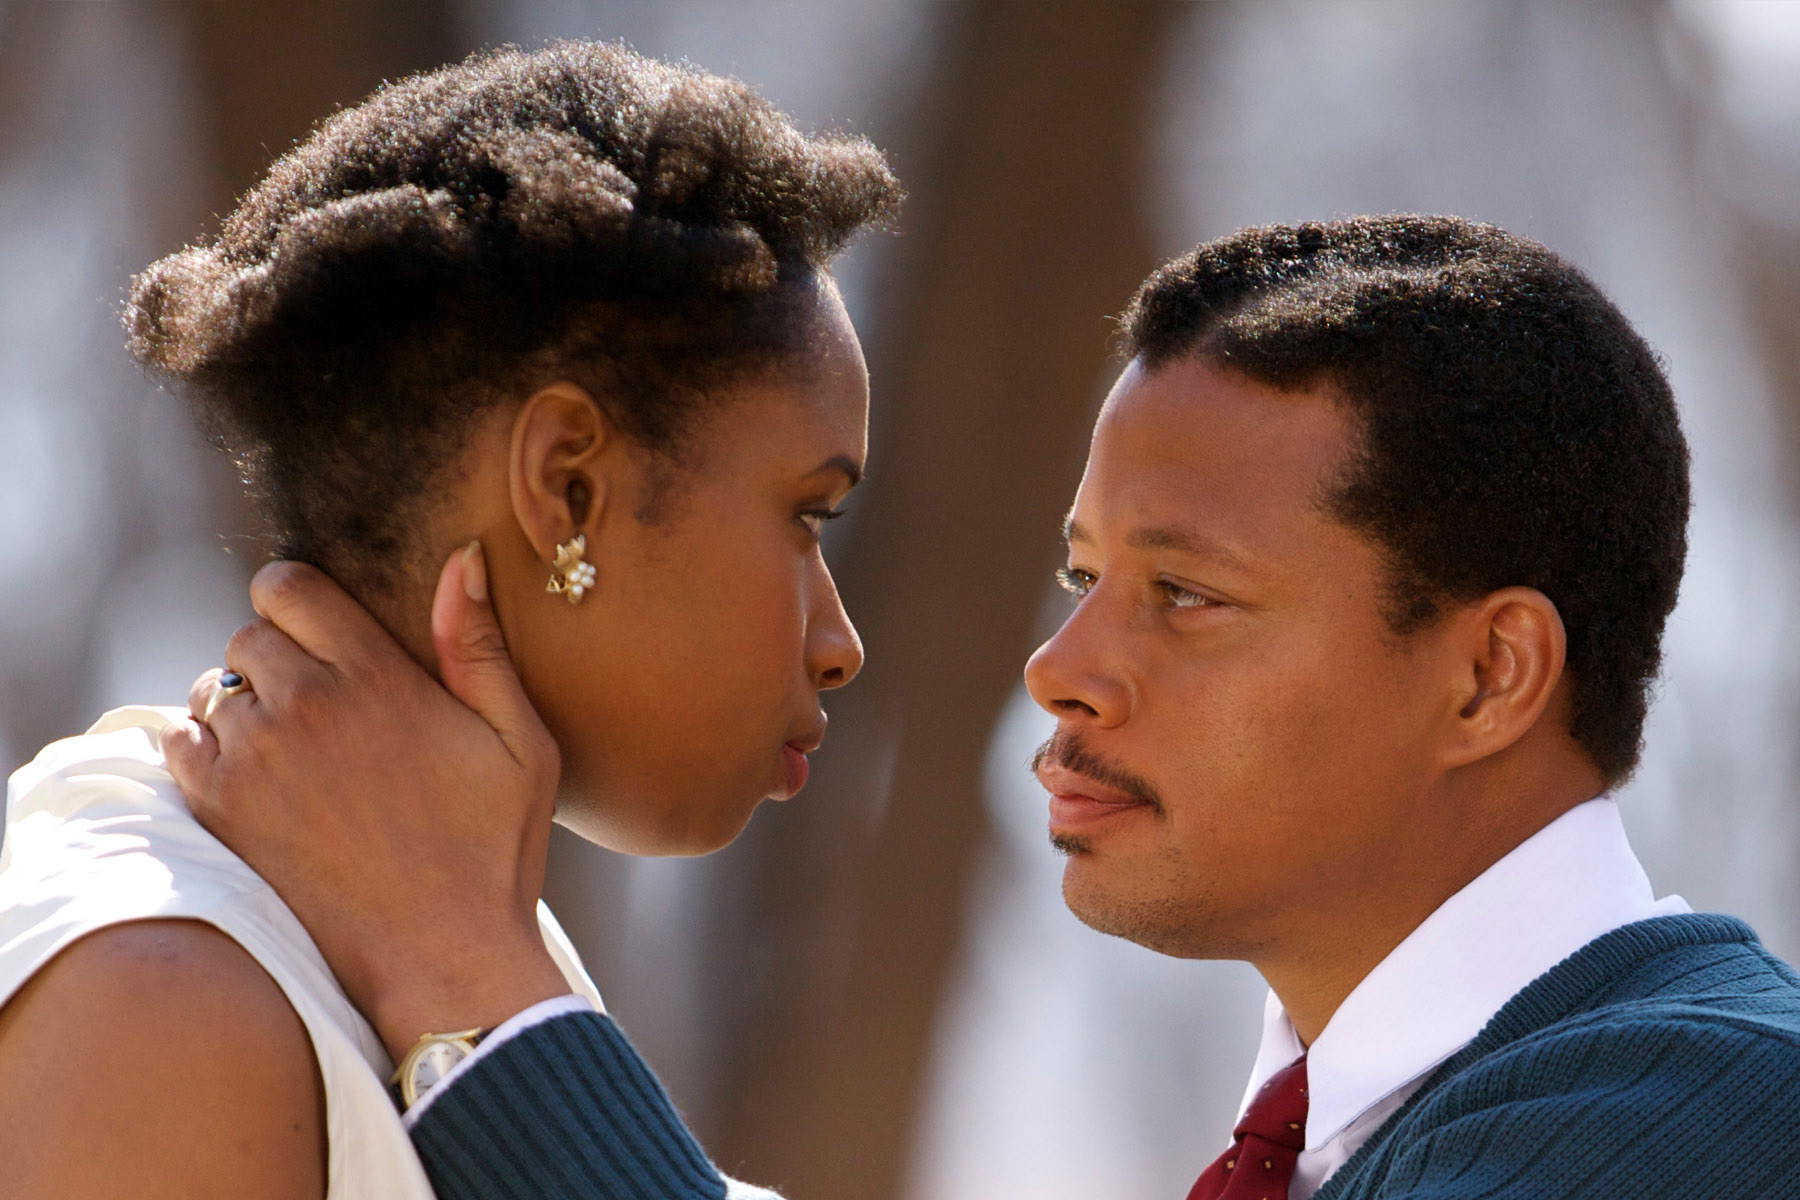 Winnie and Nelson Mandela embrace in the movie